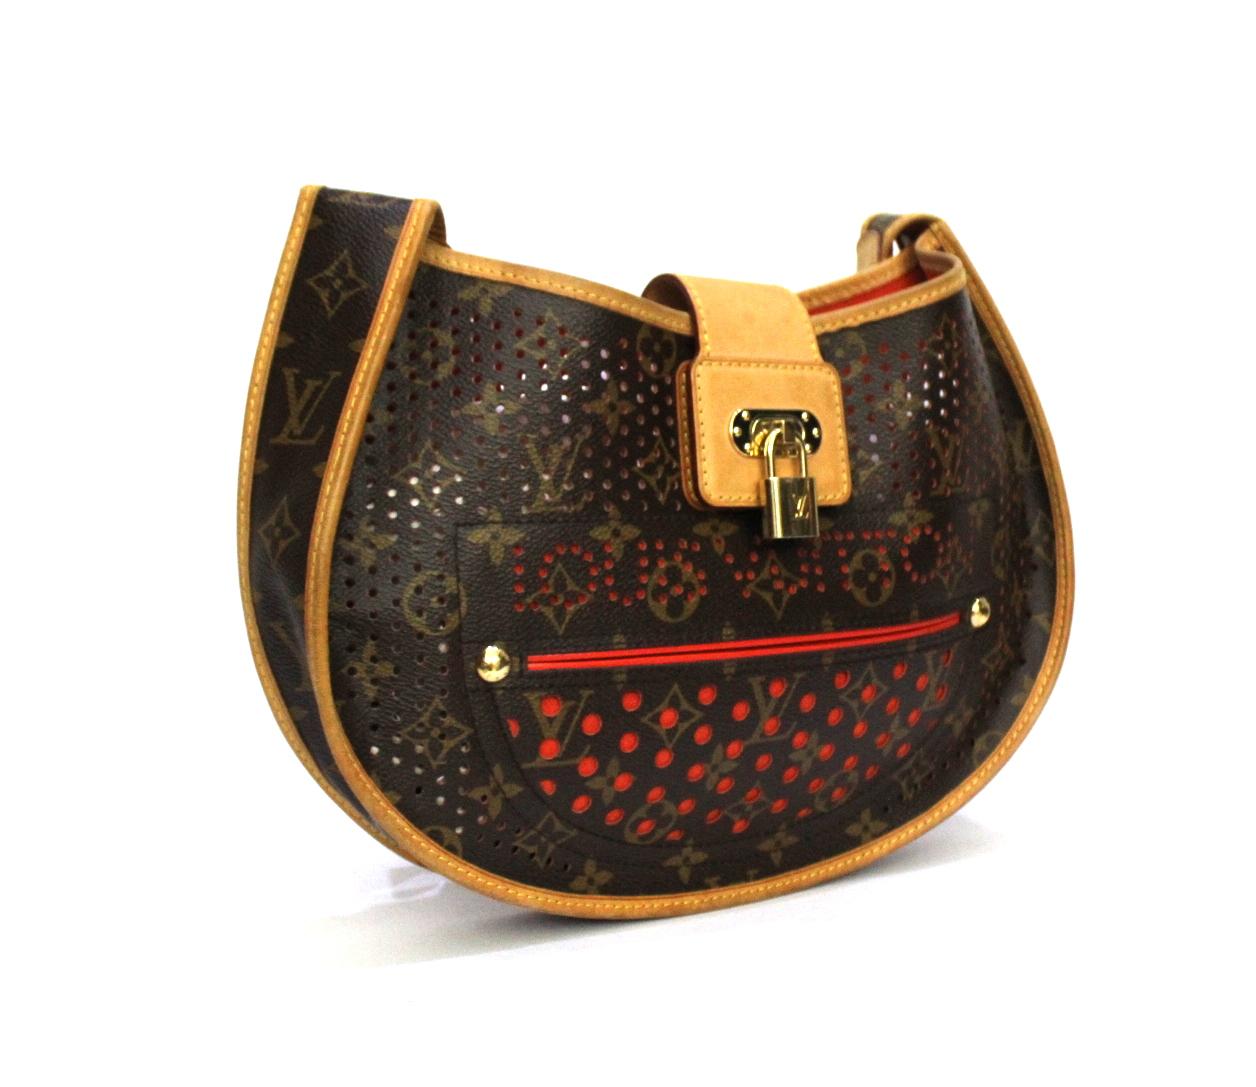 Louis Vuitton Perforated model bag made of monogram canvas with cowhide details, golden hardware and orange interior.
Equipped with adjustable handle. Closure with hook, internally quite large.
The bag is in good condition.